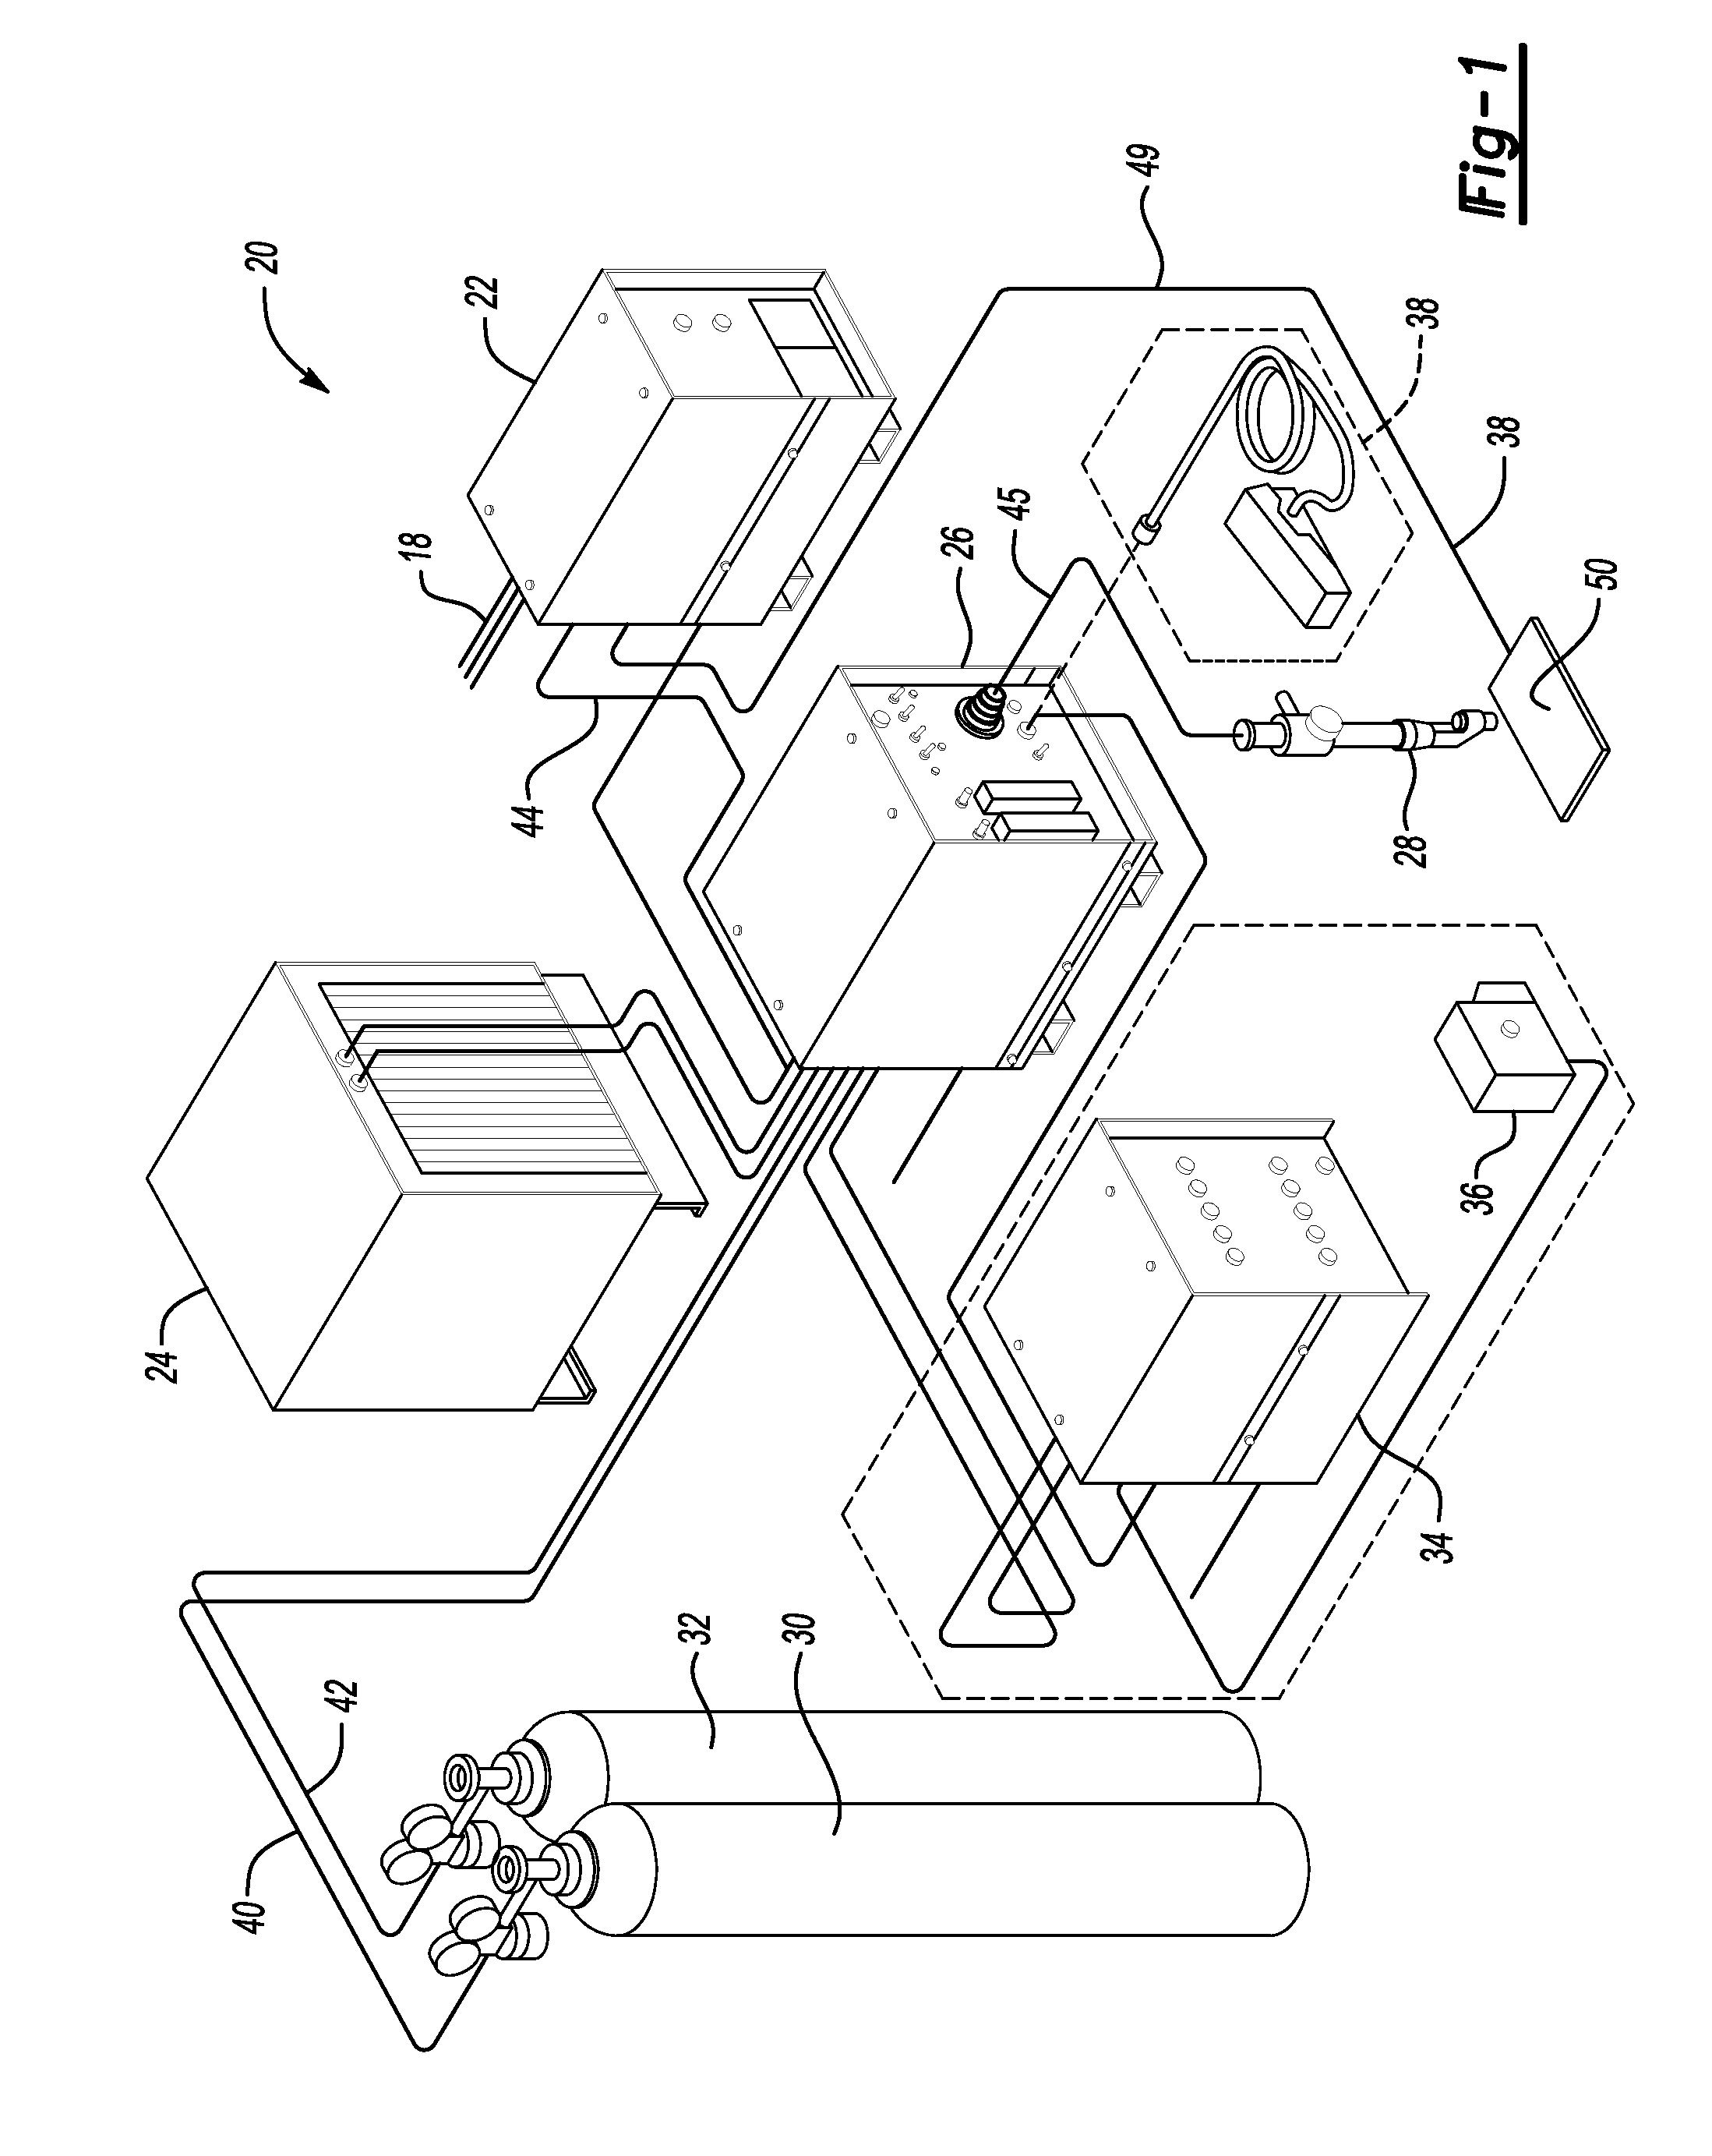 Method of converting a gas tungsten arc welding system to a plasma welding system